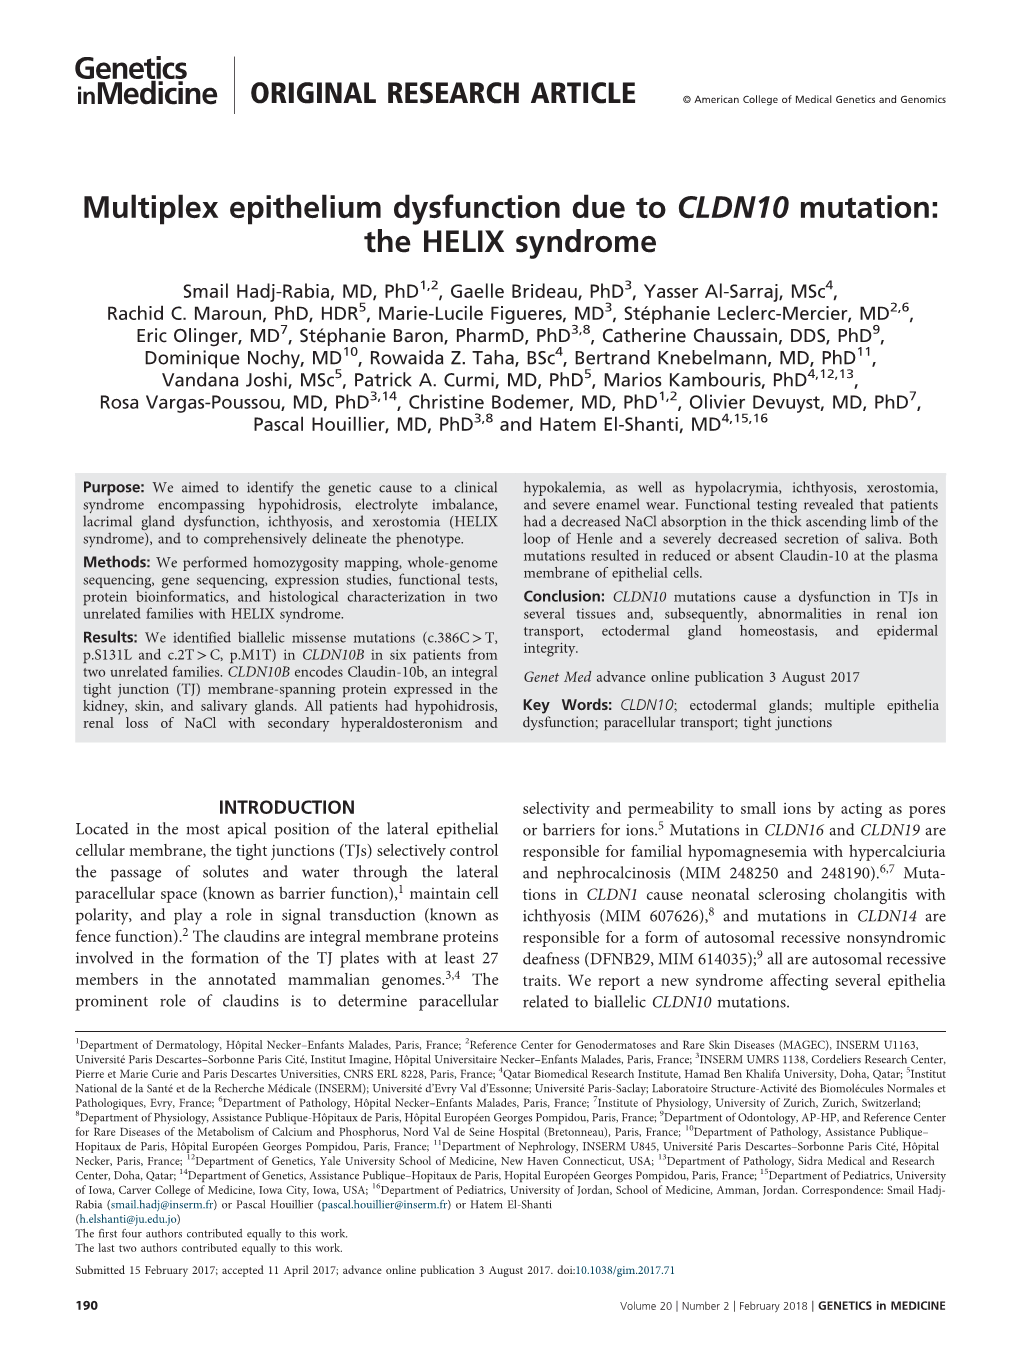 Multiplex Epithelium Dysfunction Due to CLDN10 Mutation: the HELIX Syndrome